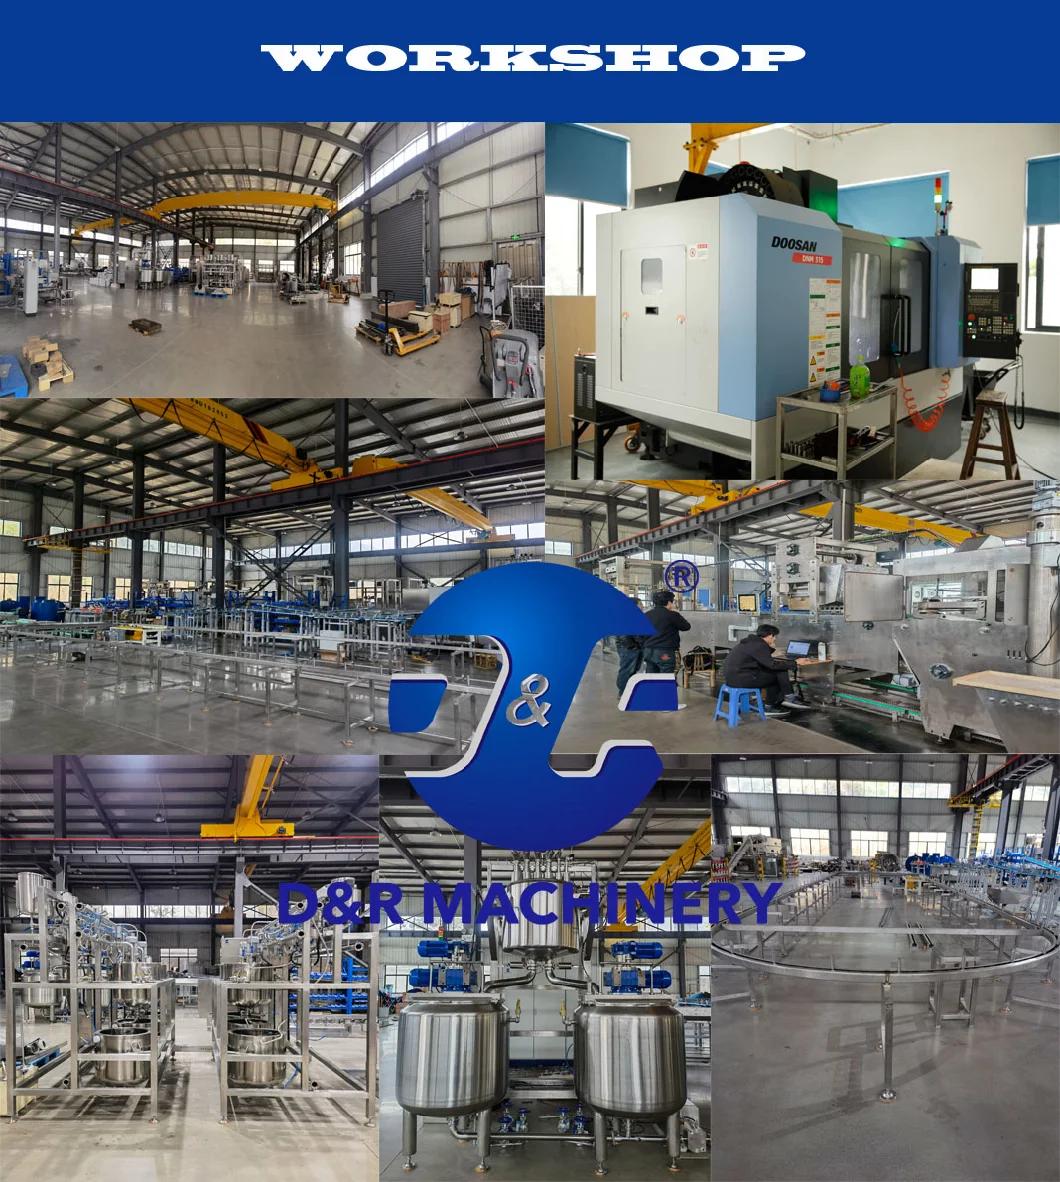 Dr-Cm-3 Automatic Chocolate Melting Machine for Chocolatier